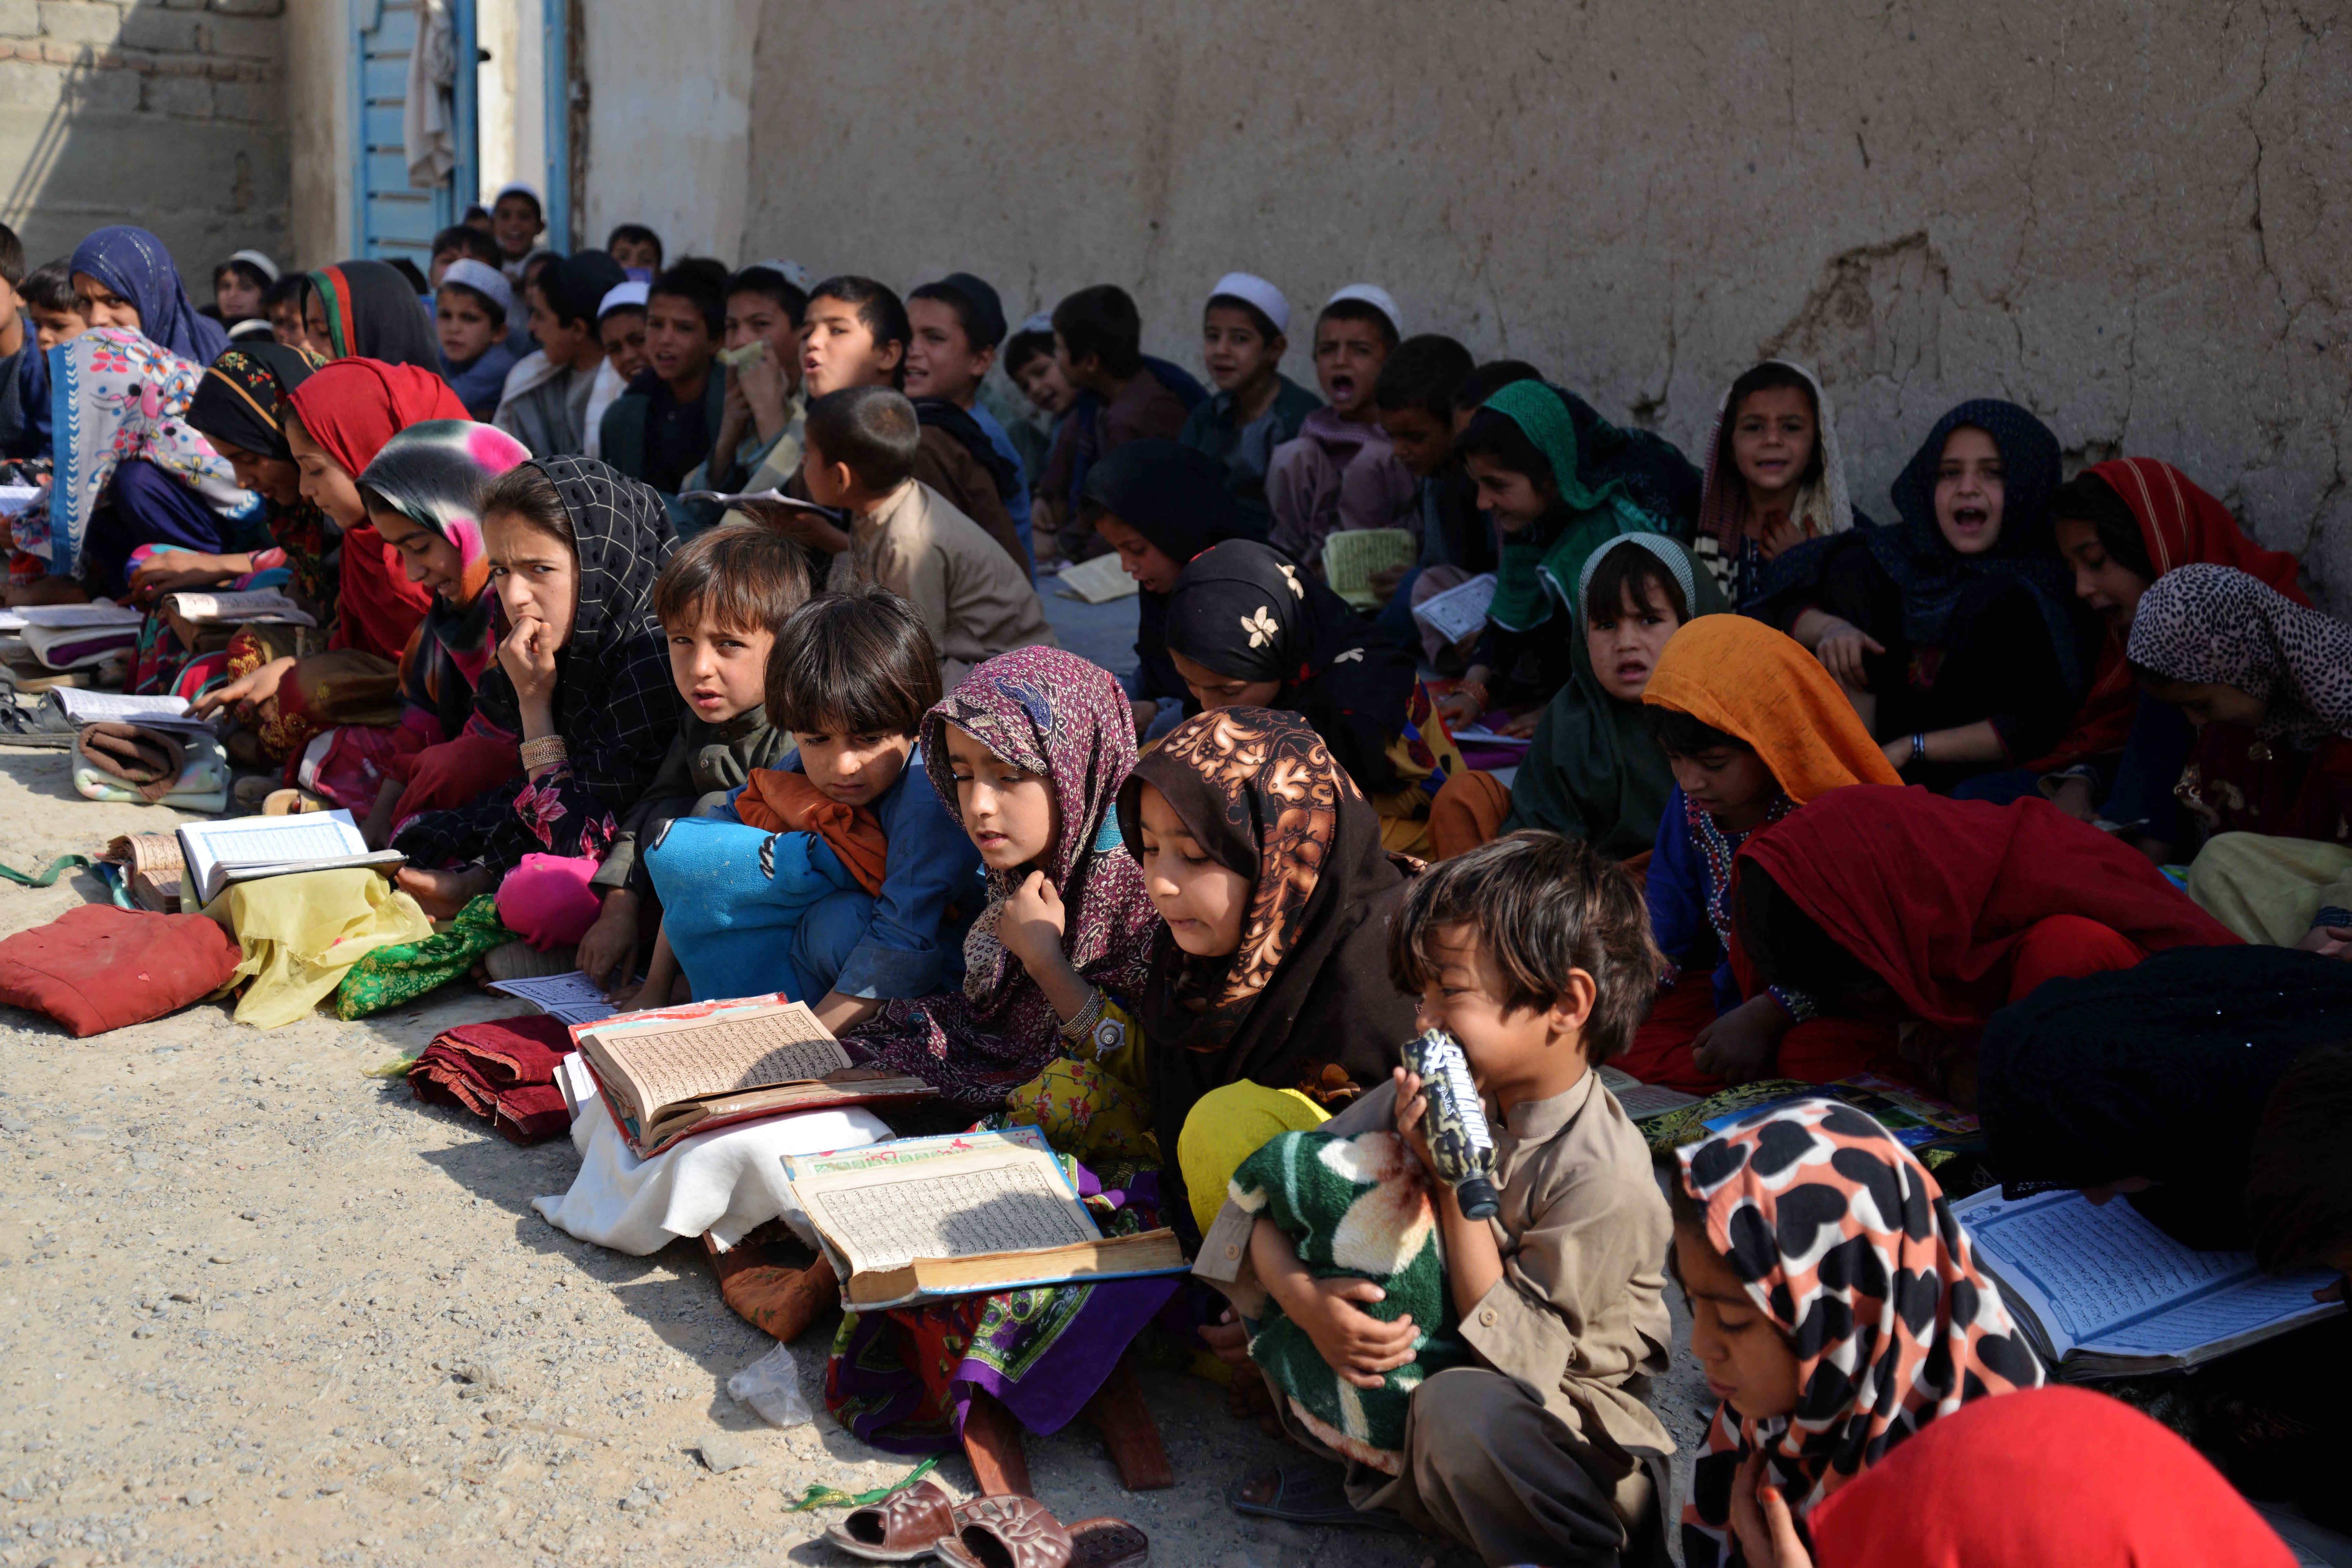 Afghan children study the Quran at an open air madrassa or an Islamic school on the outskirts of Kandahar province